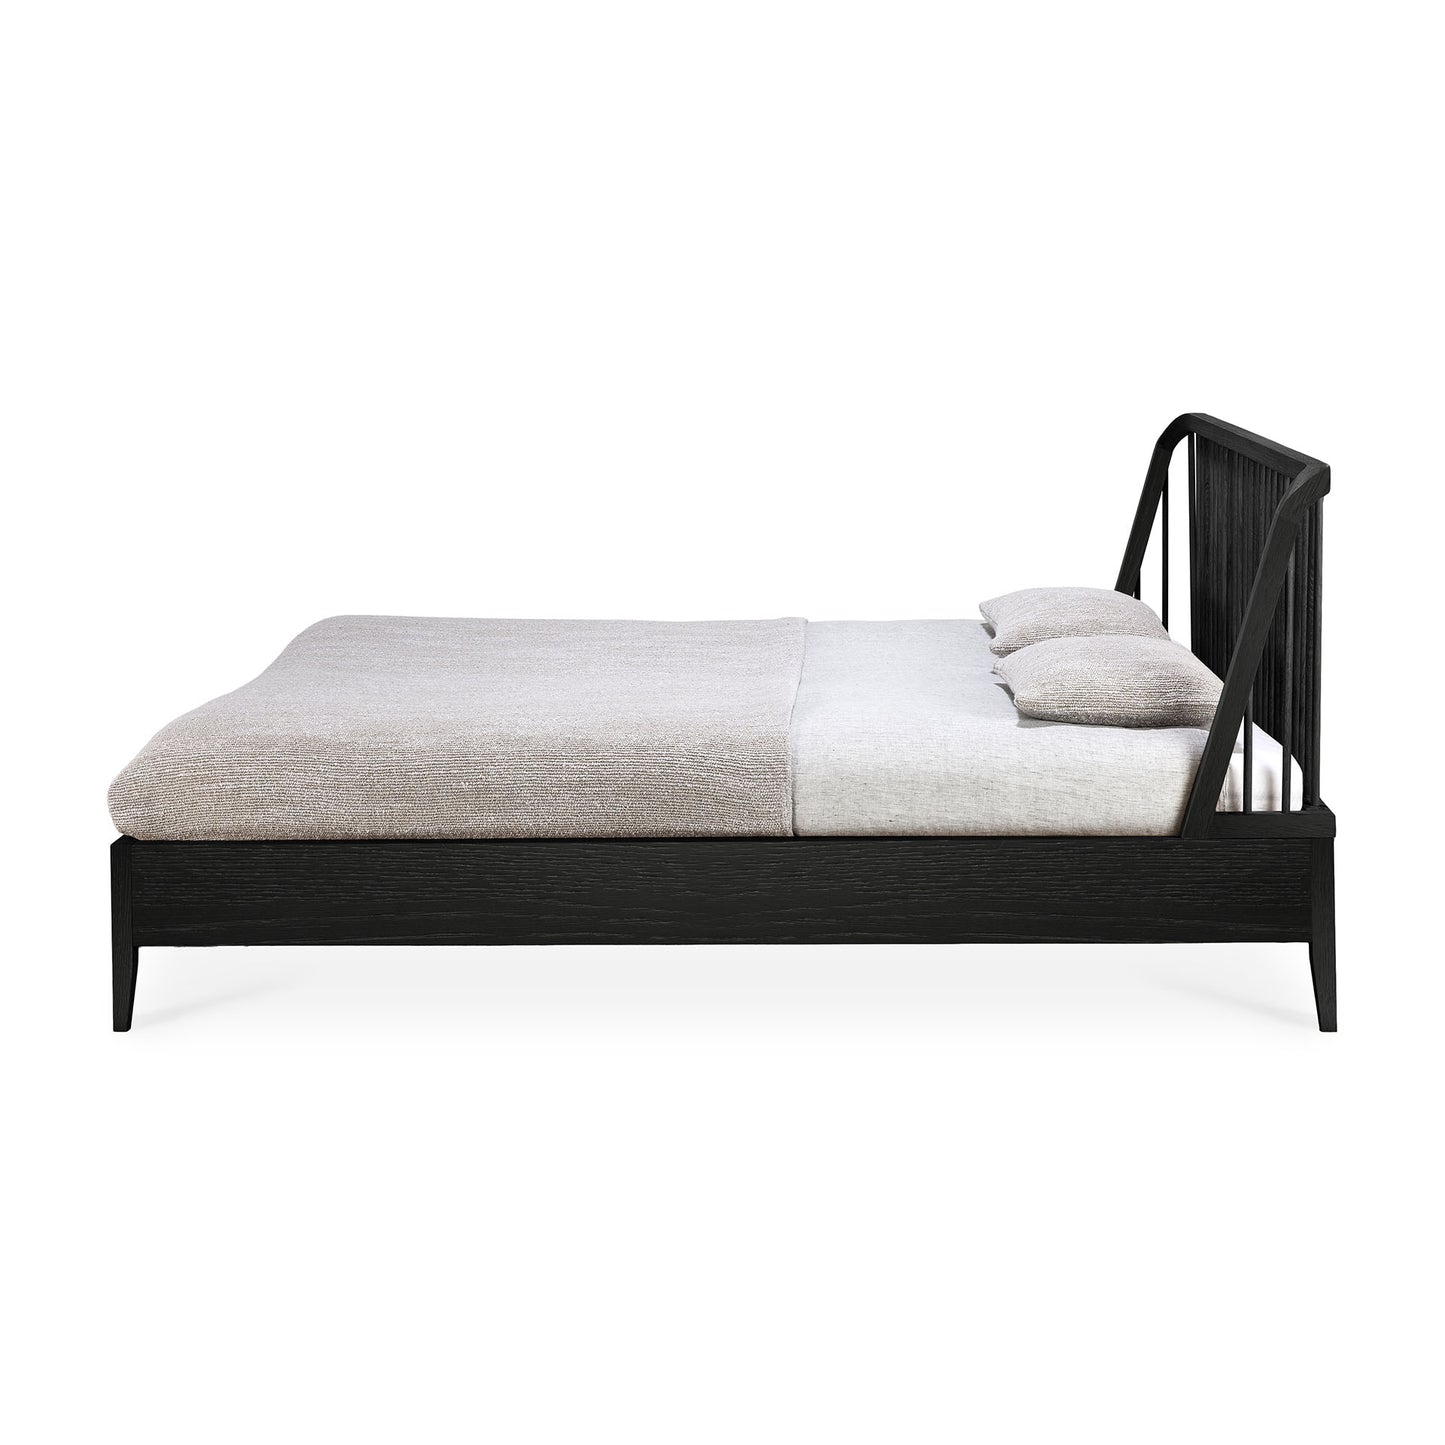 Ethnicraft Oak Black Spindle Bed is available from Make Your House A Home, Bendigo, Victoria, Australia